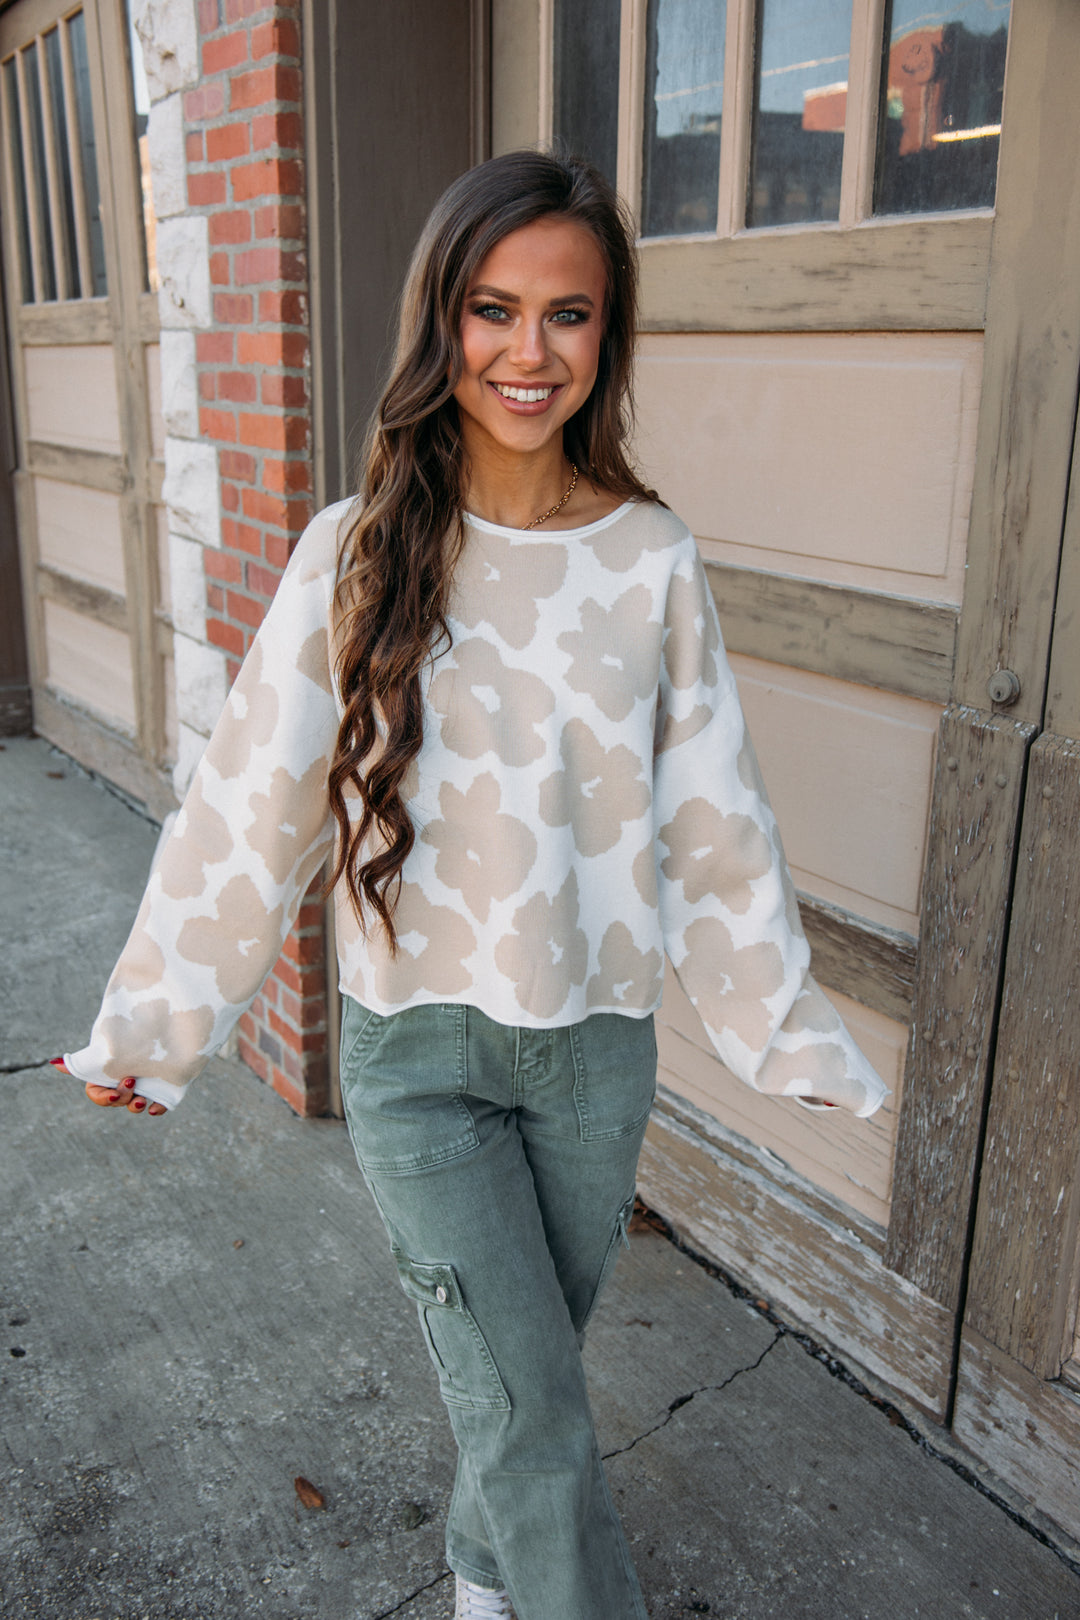 Eyes On You Flower Sweater - Cream/Taupe